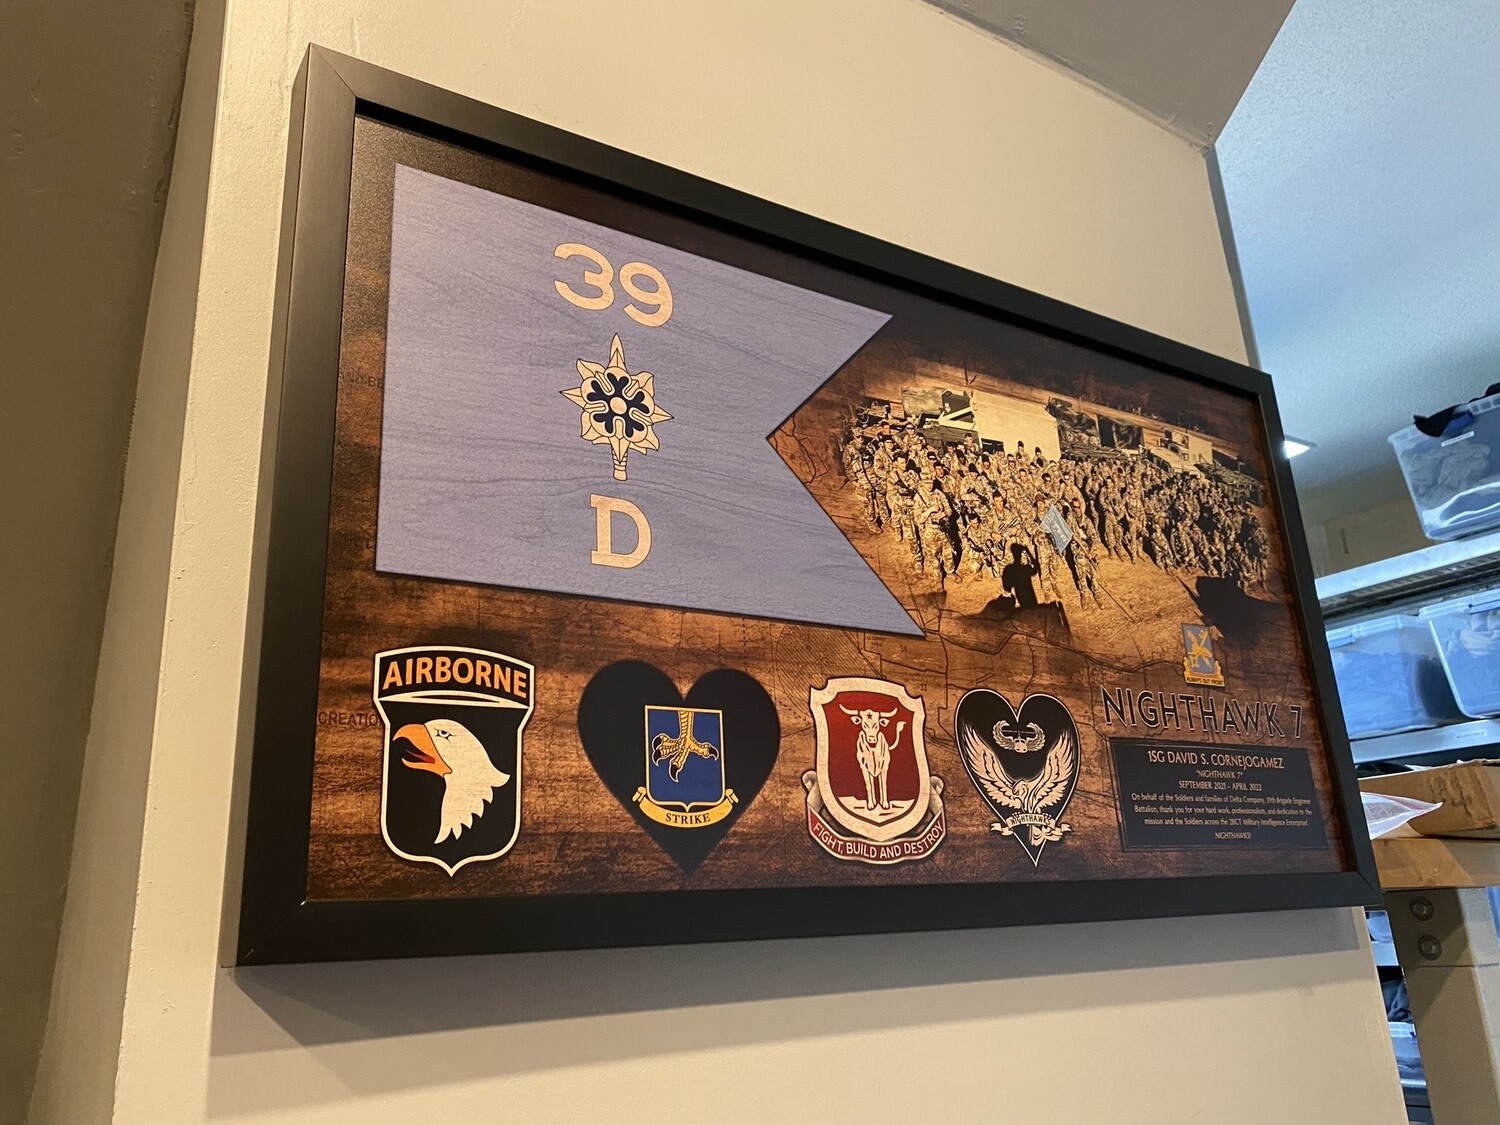 D Co 39 BEB "Nighthawks" Guidon and Photo Plaque - 28.5"x15.75"